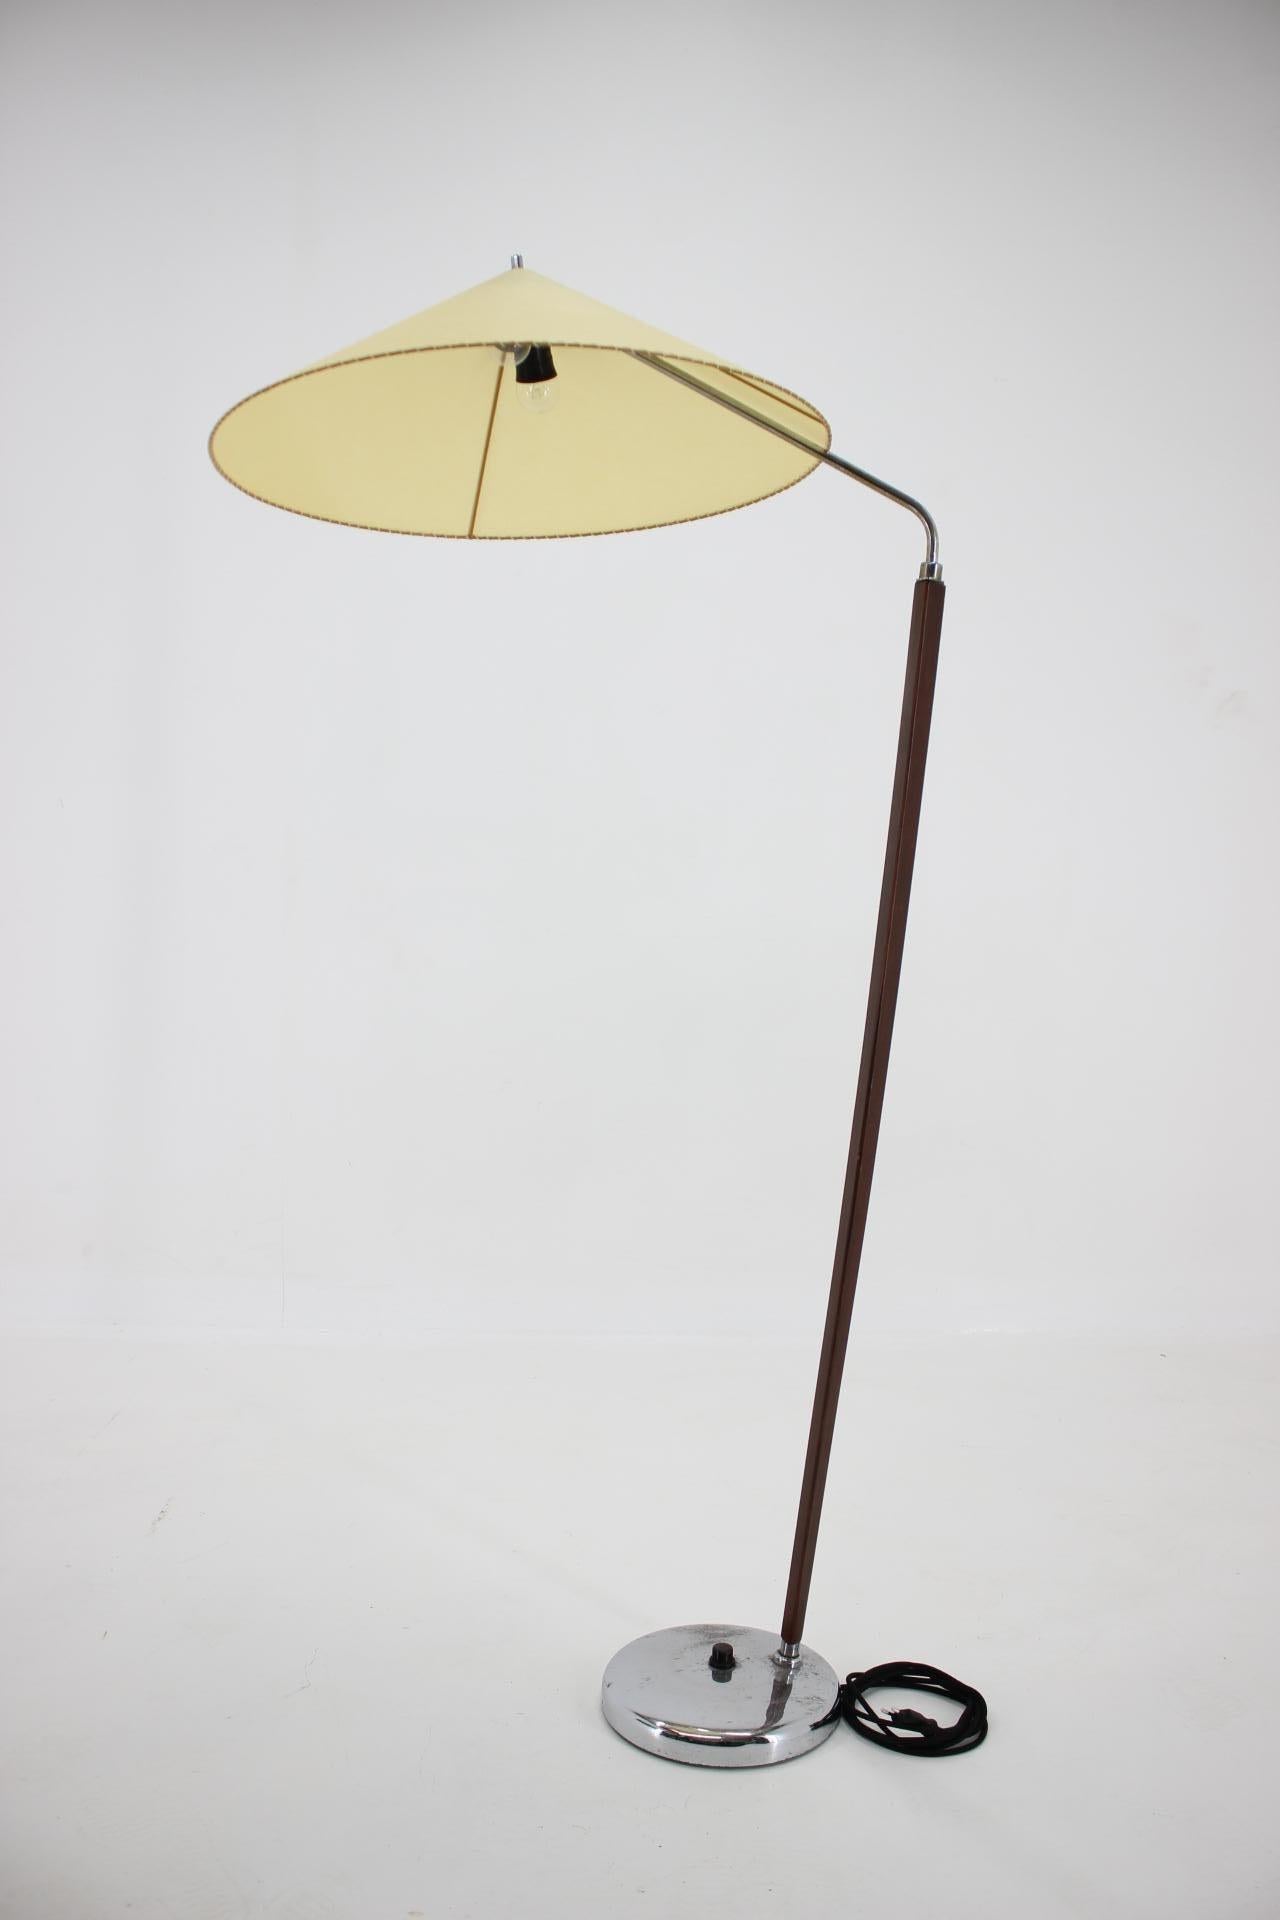 - Czechoslovakia, around 1960s
- New parchment paper hand made lampshade
- good original condition with patina
jt.